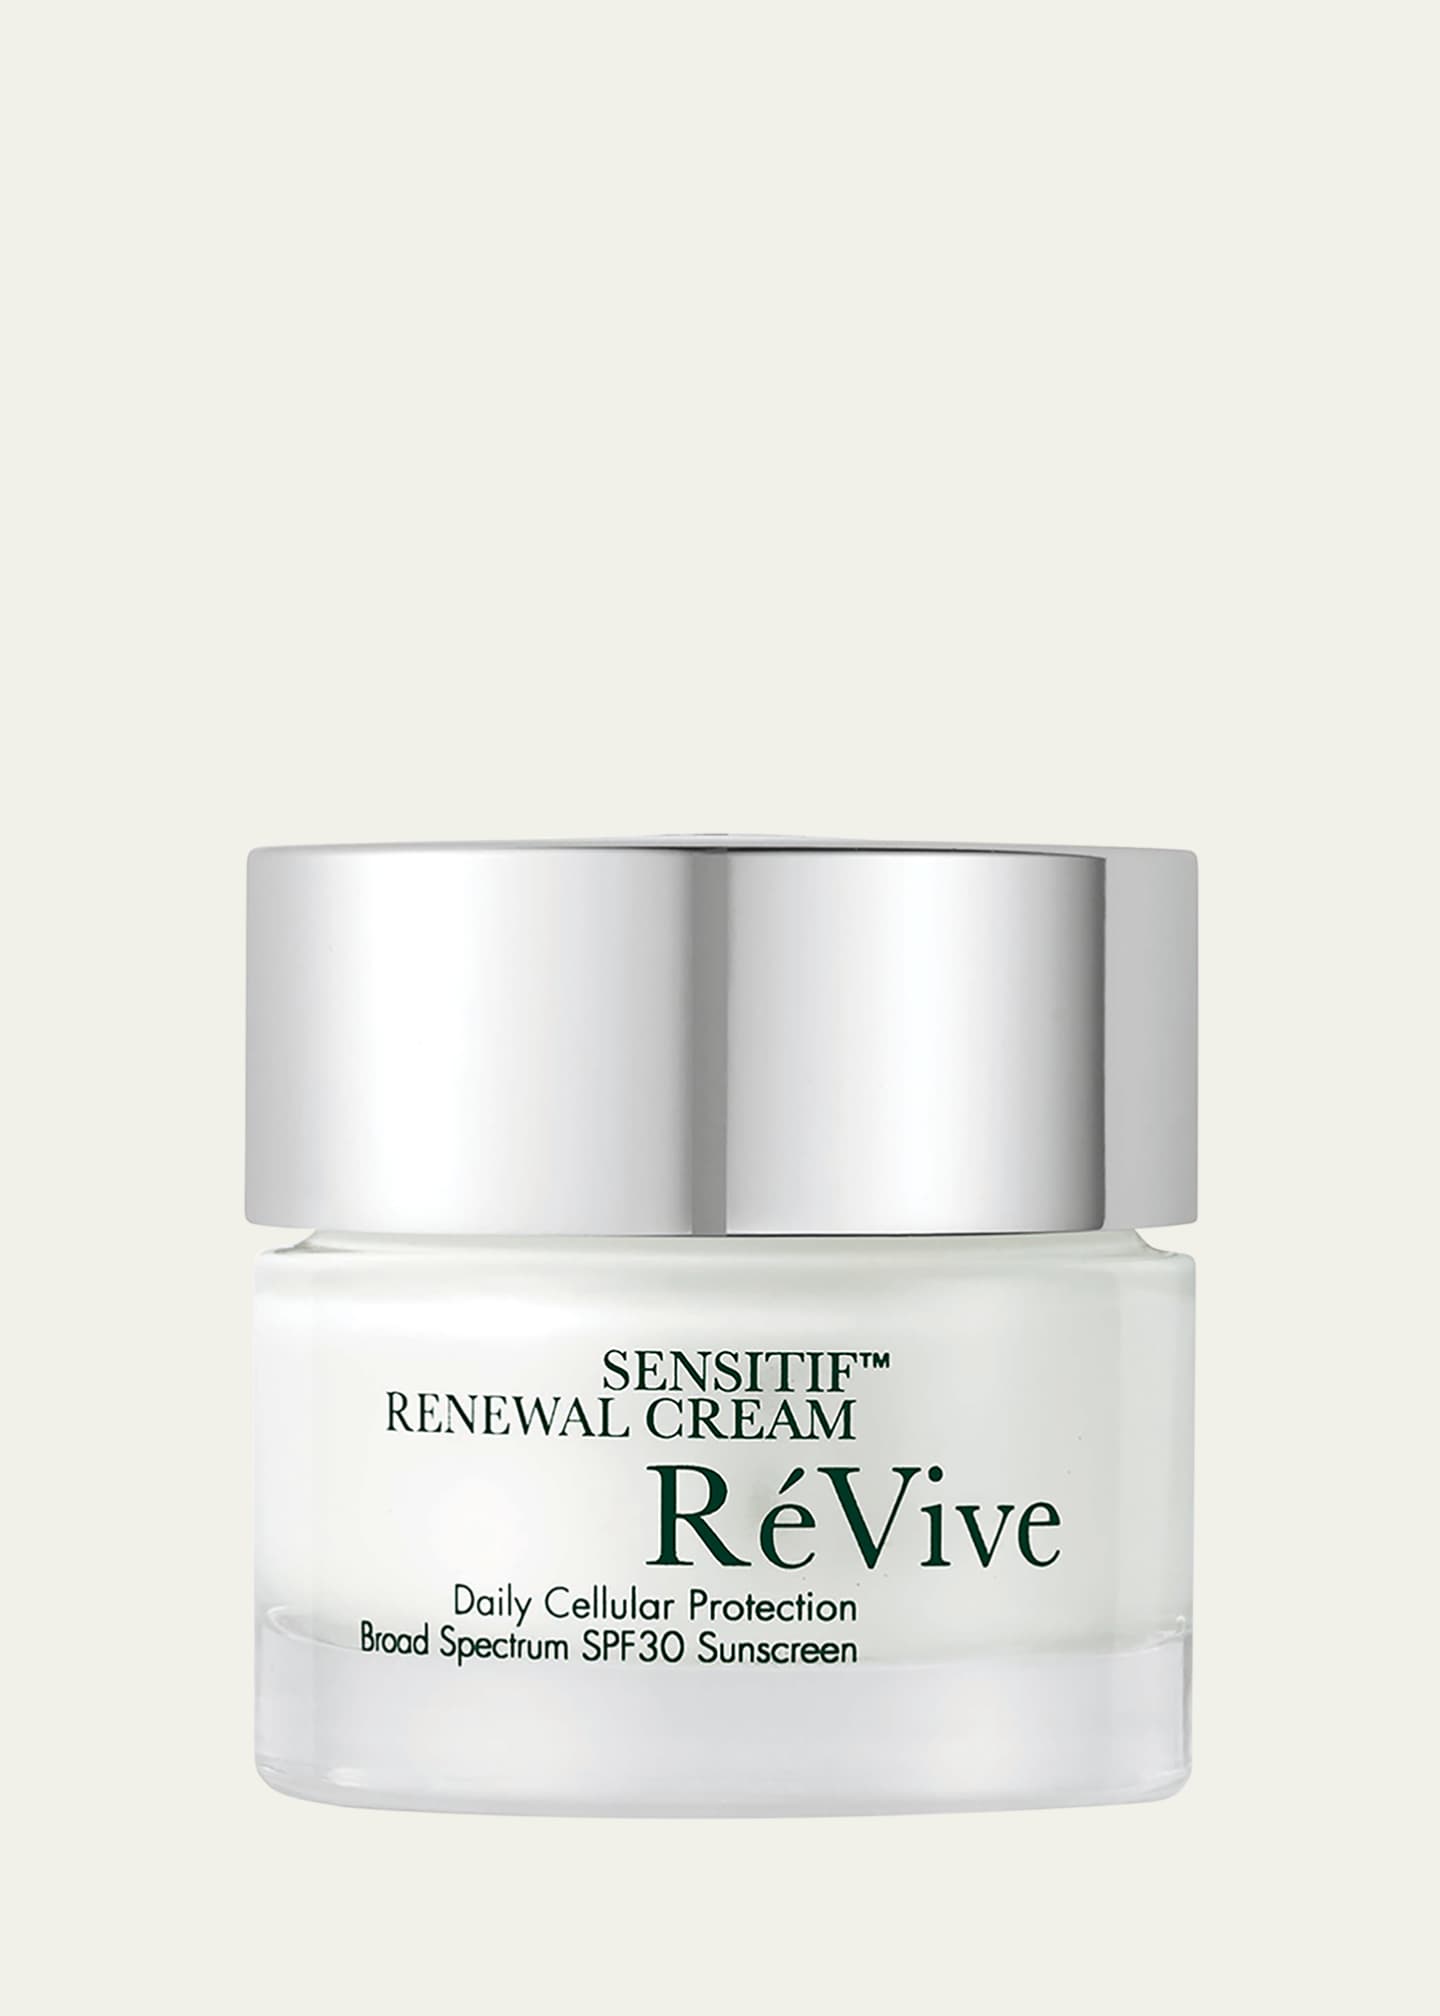 ReVive Daily Cellular Protection Broad Spectrum SPF 30 Sunscreen